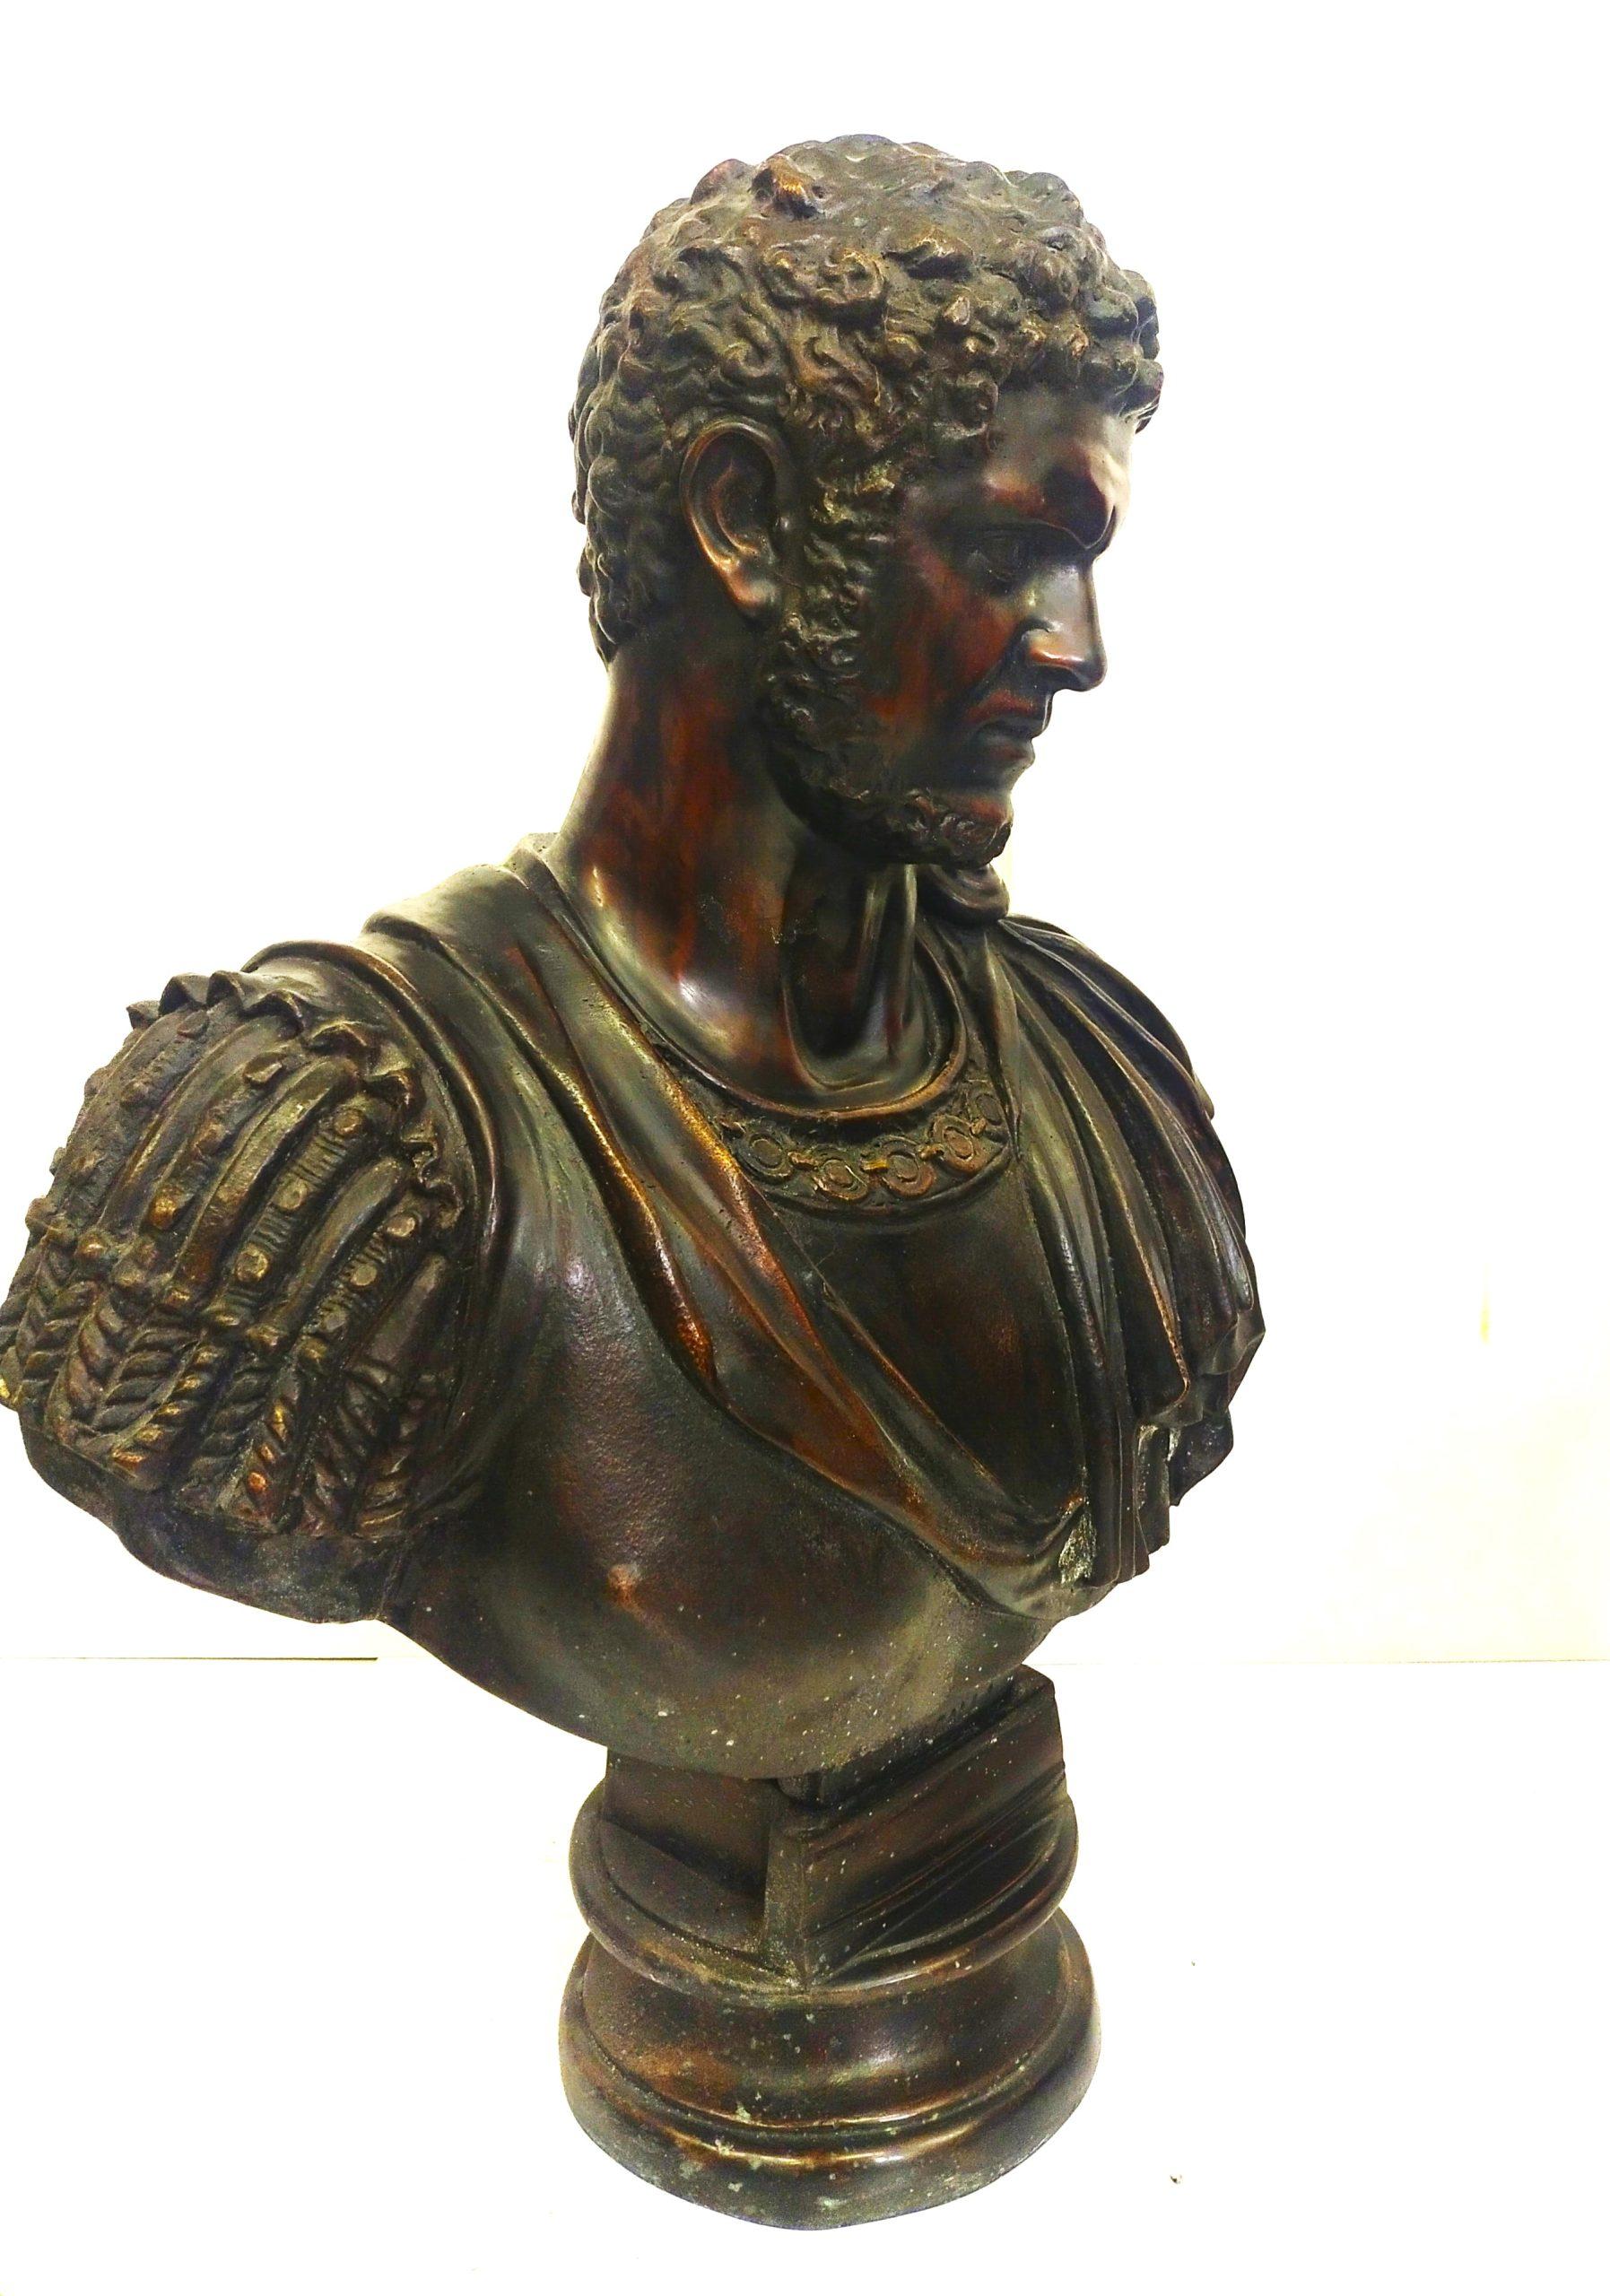 Pair of bronze emperor busts, ADDITIONAL PHOTOS, INFORMATION OF THE LOT AND QUOTE FOR SHIPPING COST CAN BE REQUEST BY SENDING AN EMAIL